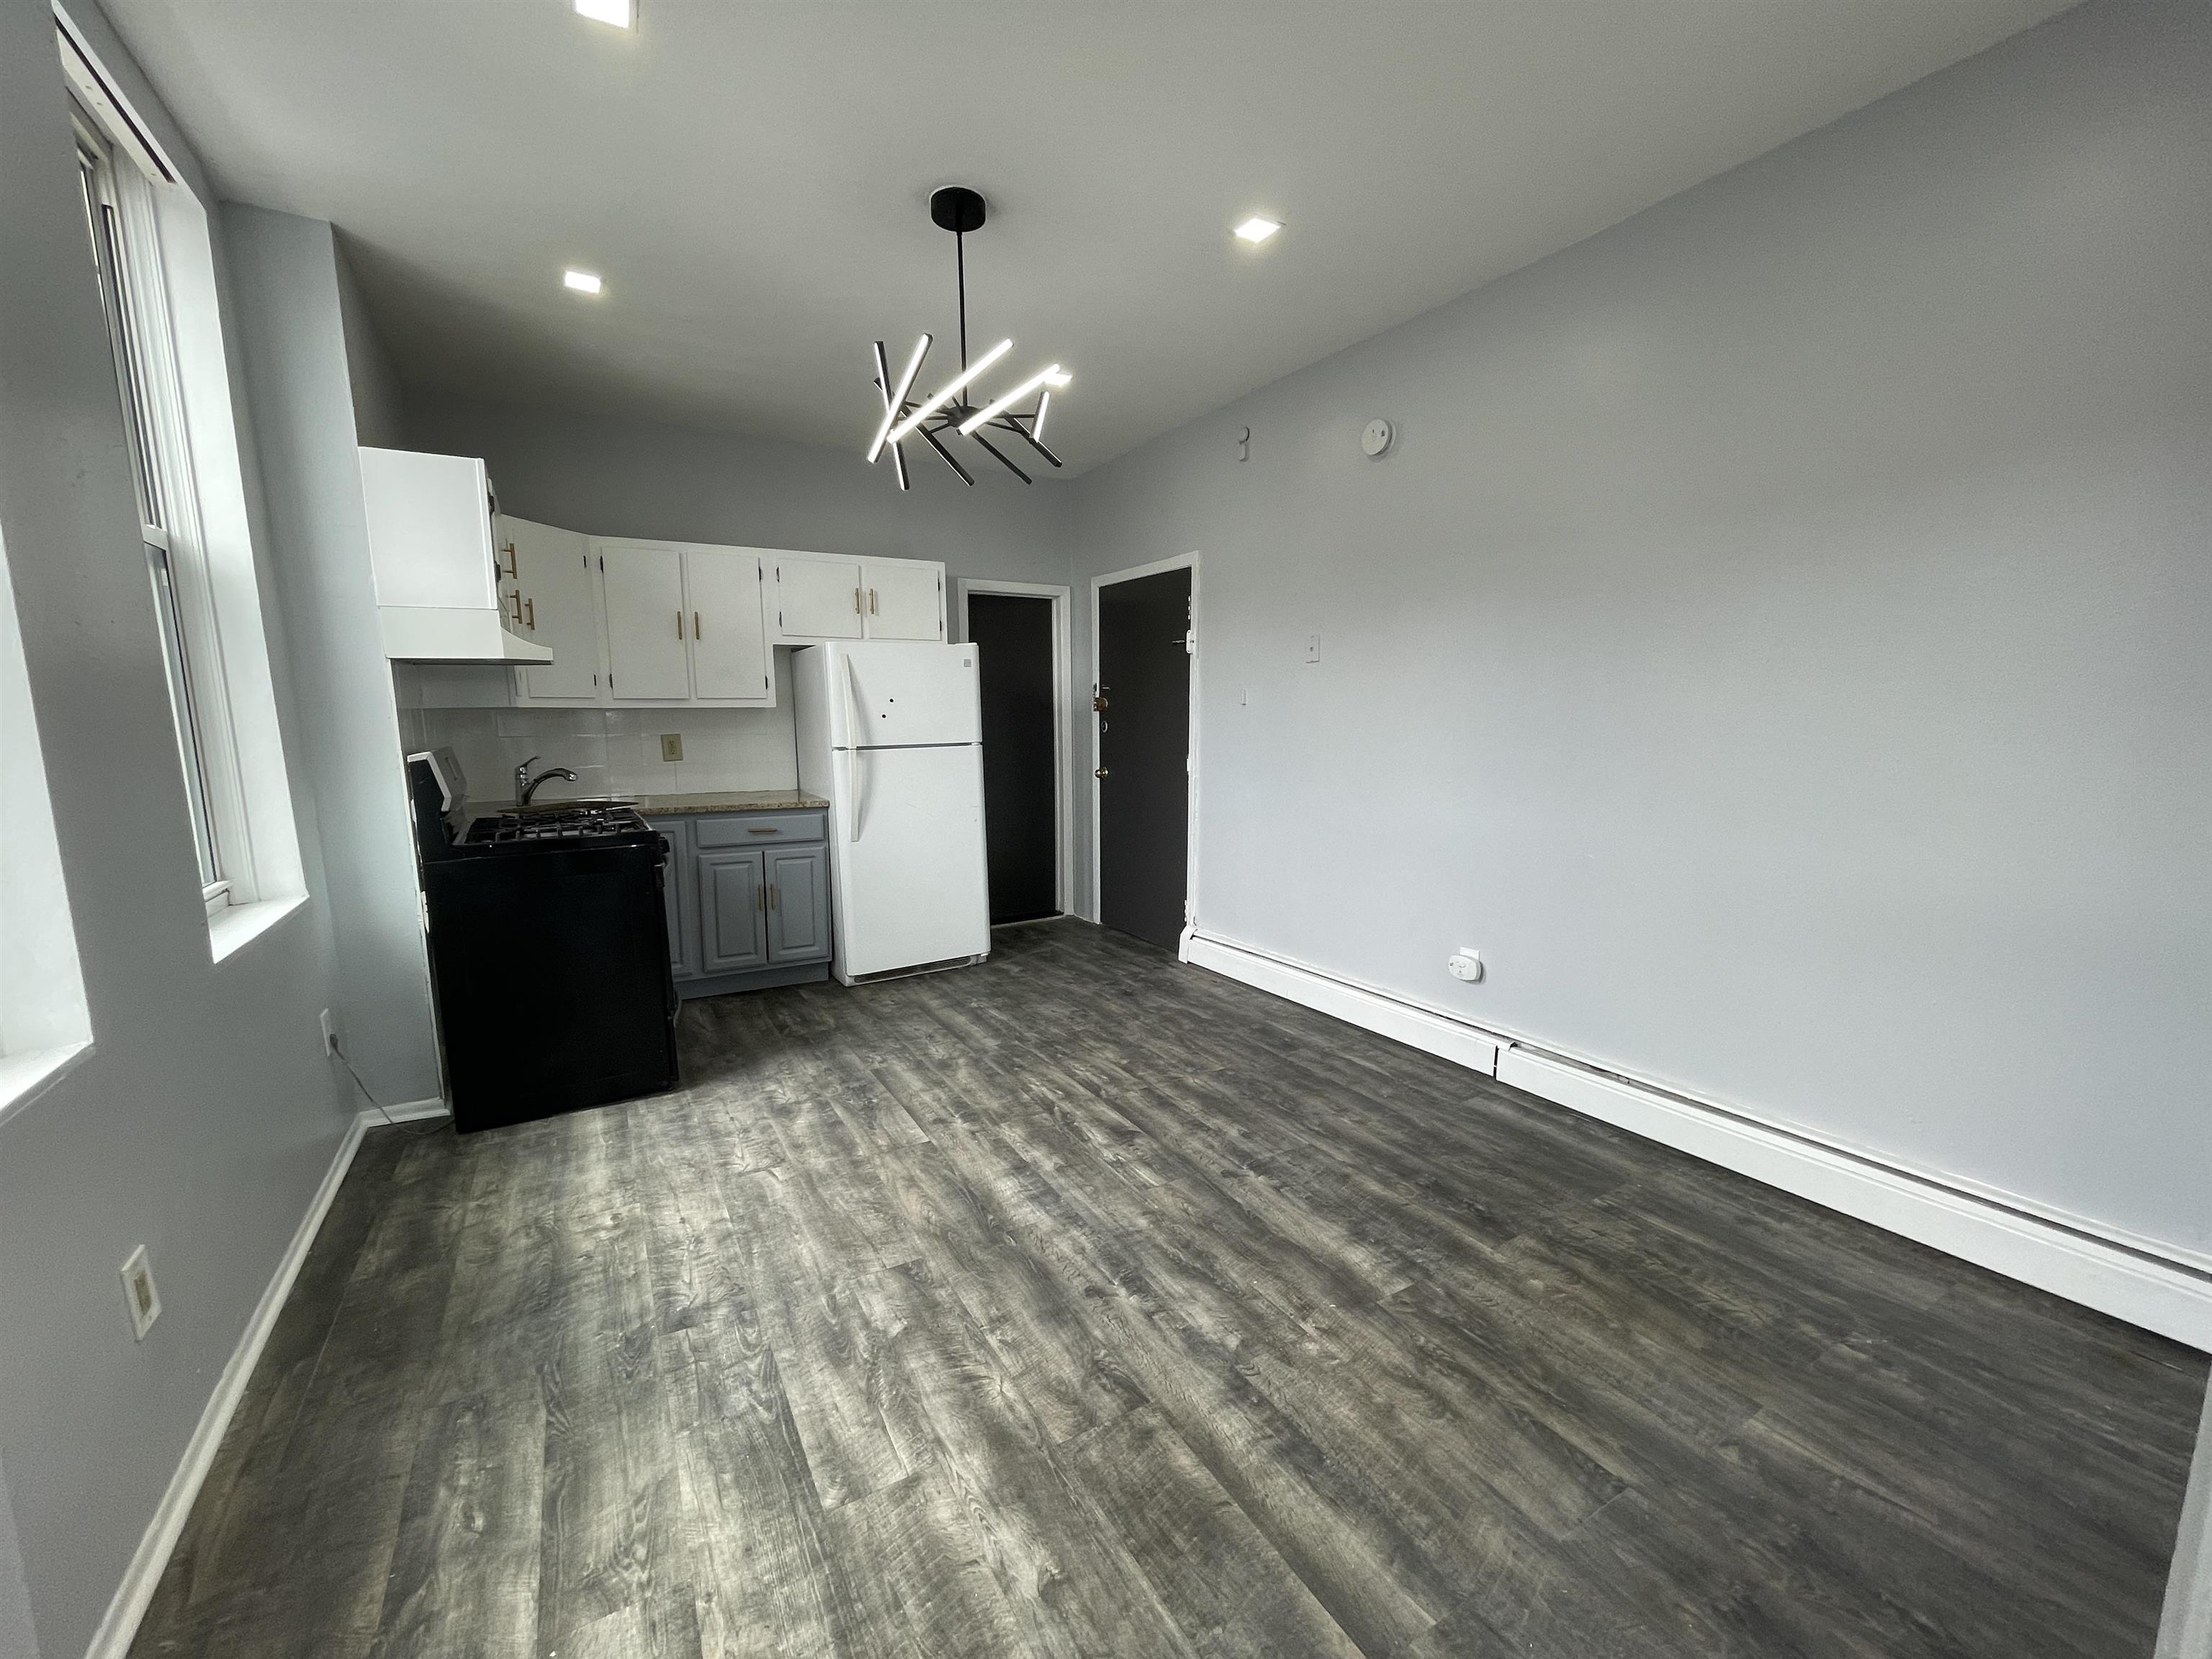 # 240009129 - For Rent in JERSEY CITY - Heights NJ